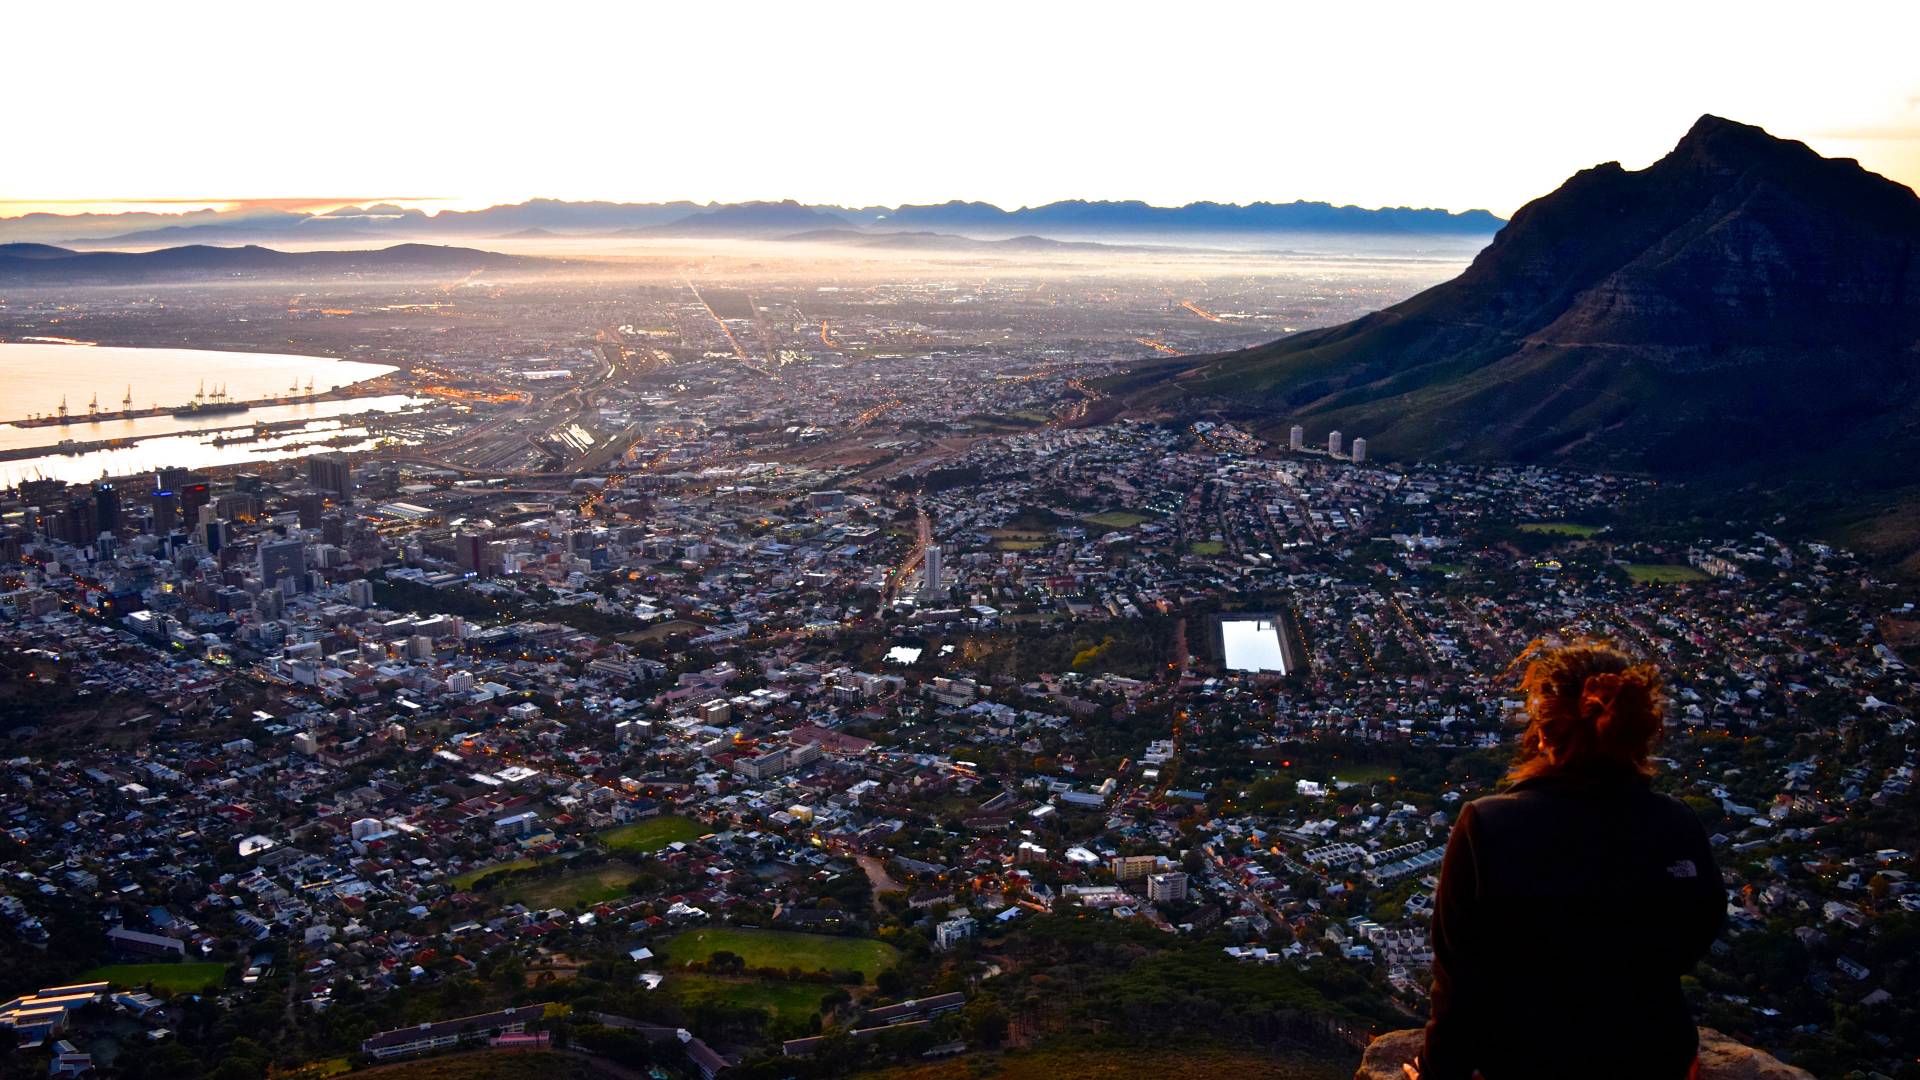 Student overlooks a city in South Africa